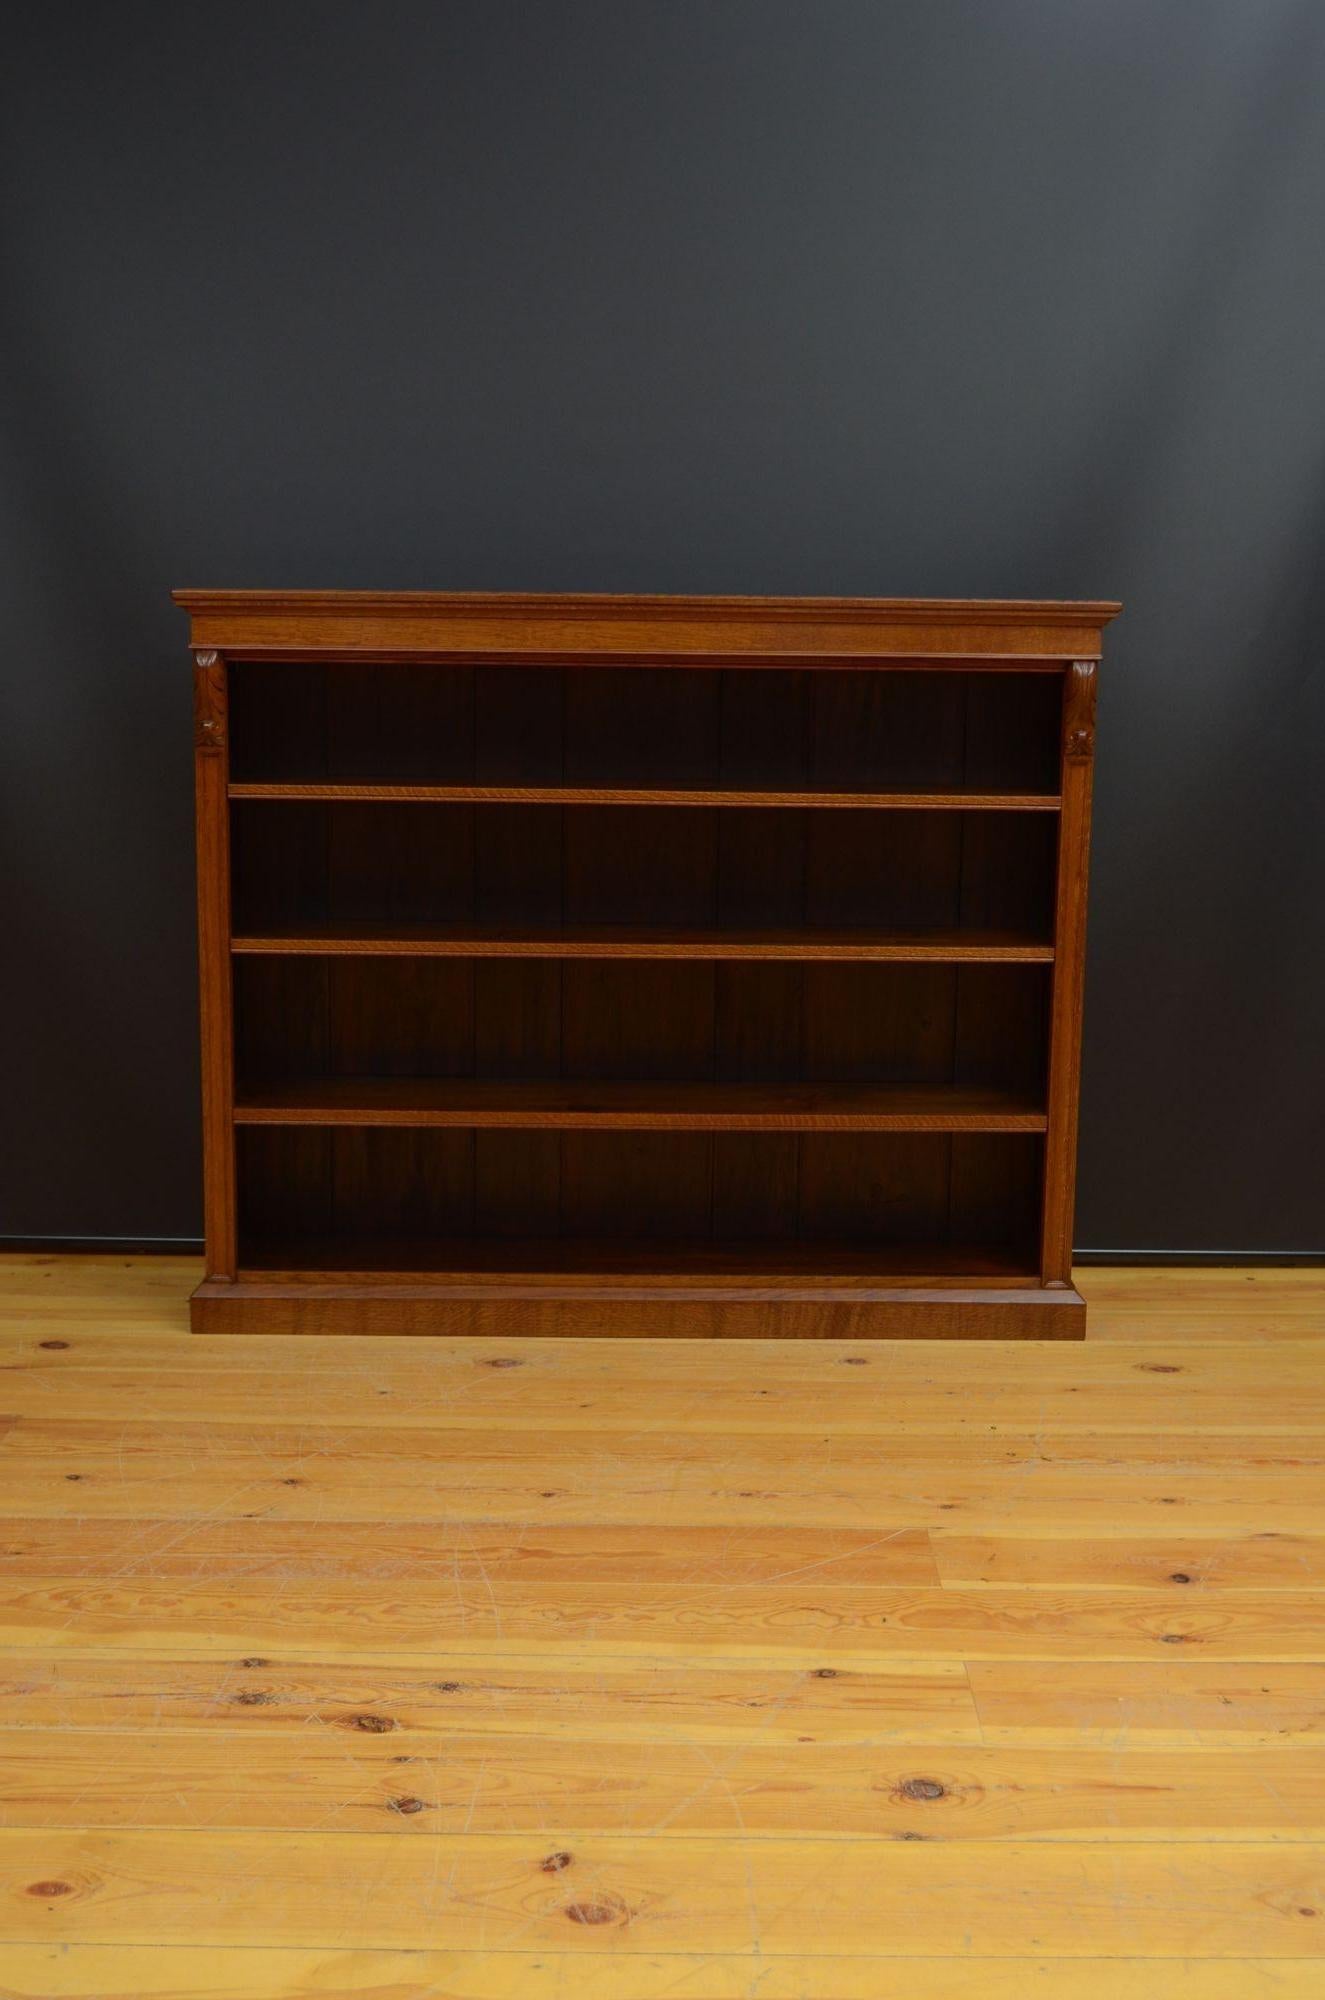 R040 Victorian oak open bookcase, having a solid oak top above shallow frieze and three height adjustable shelves flanked by moulded pilasters and fine drop carvings, all standing on a canted plinth base.
This antique bookcase is in home ready